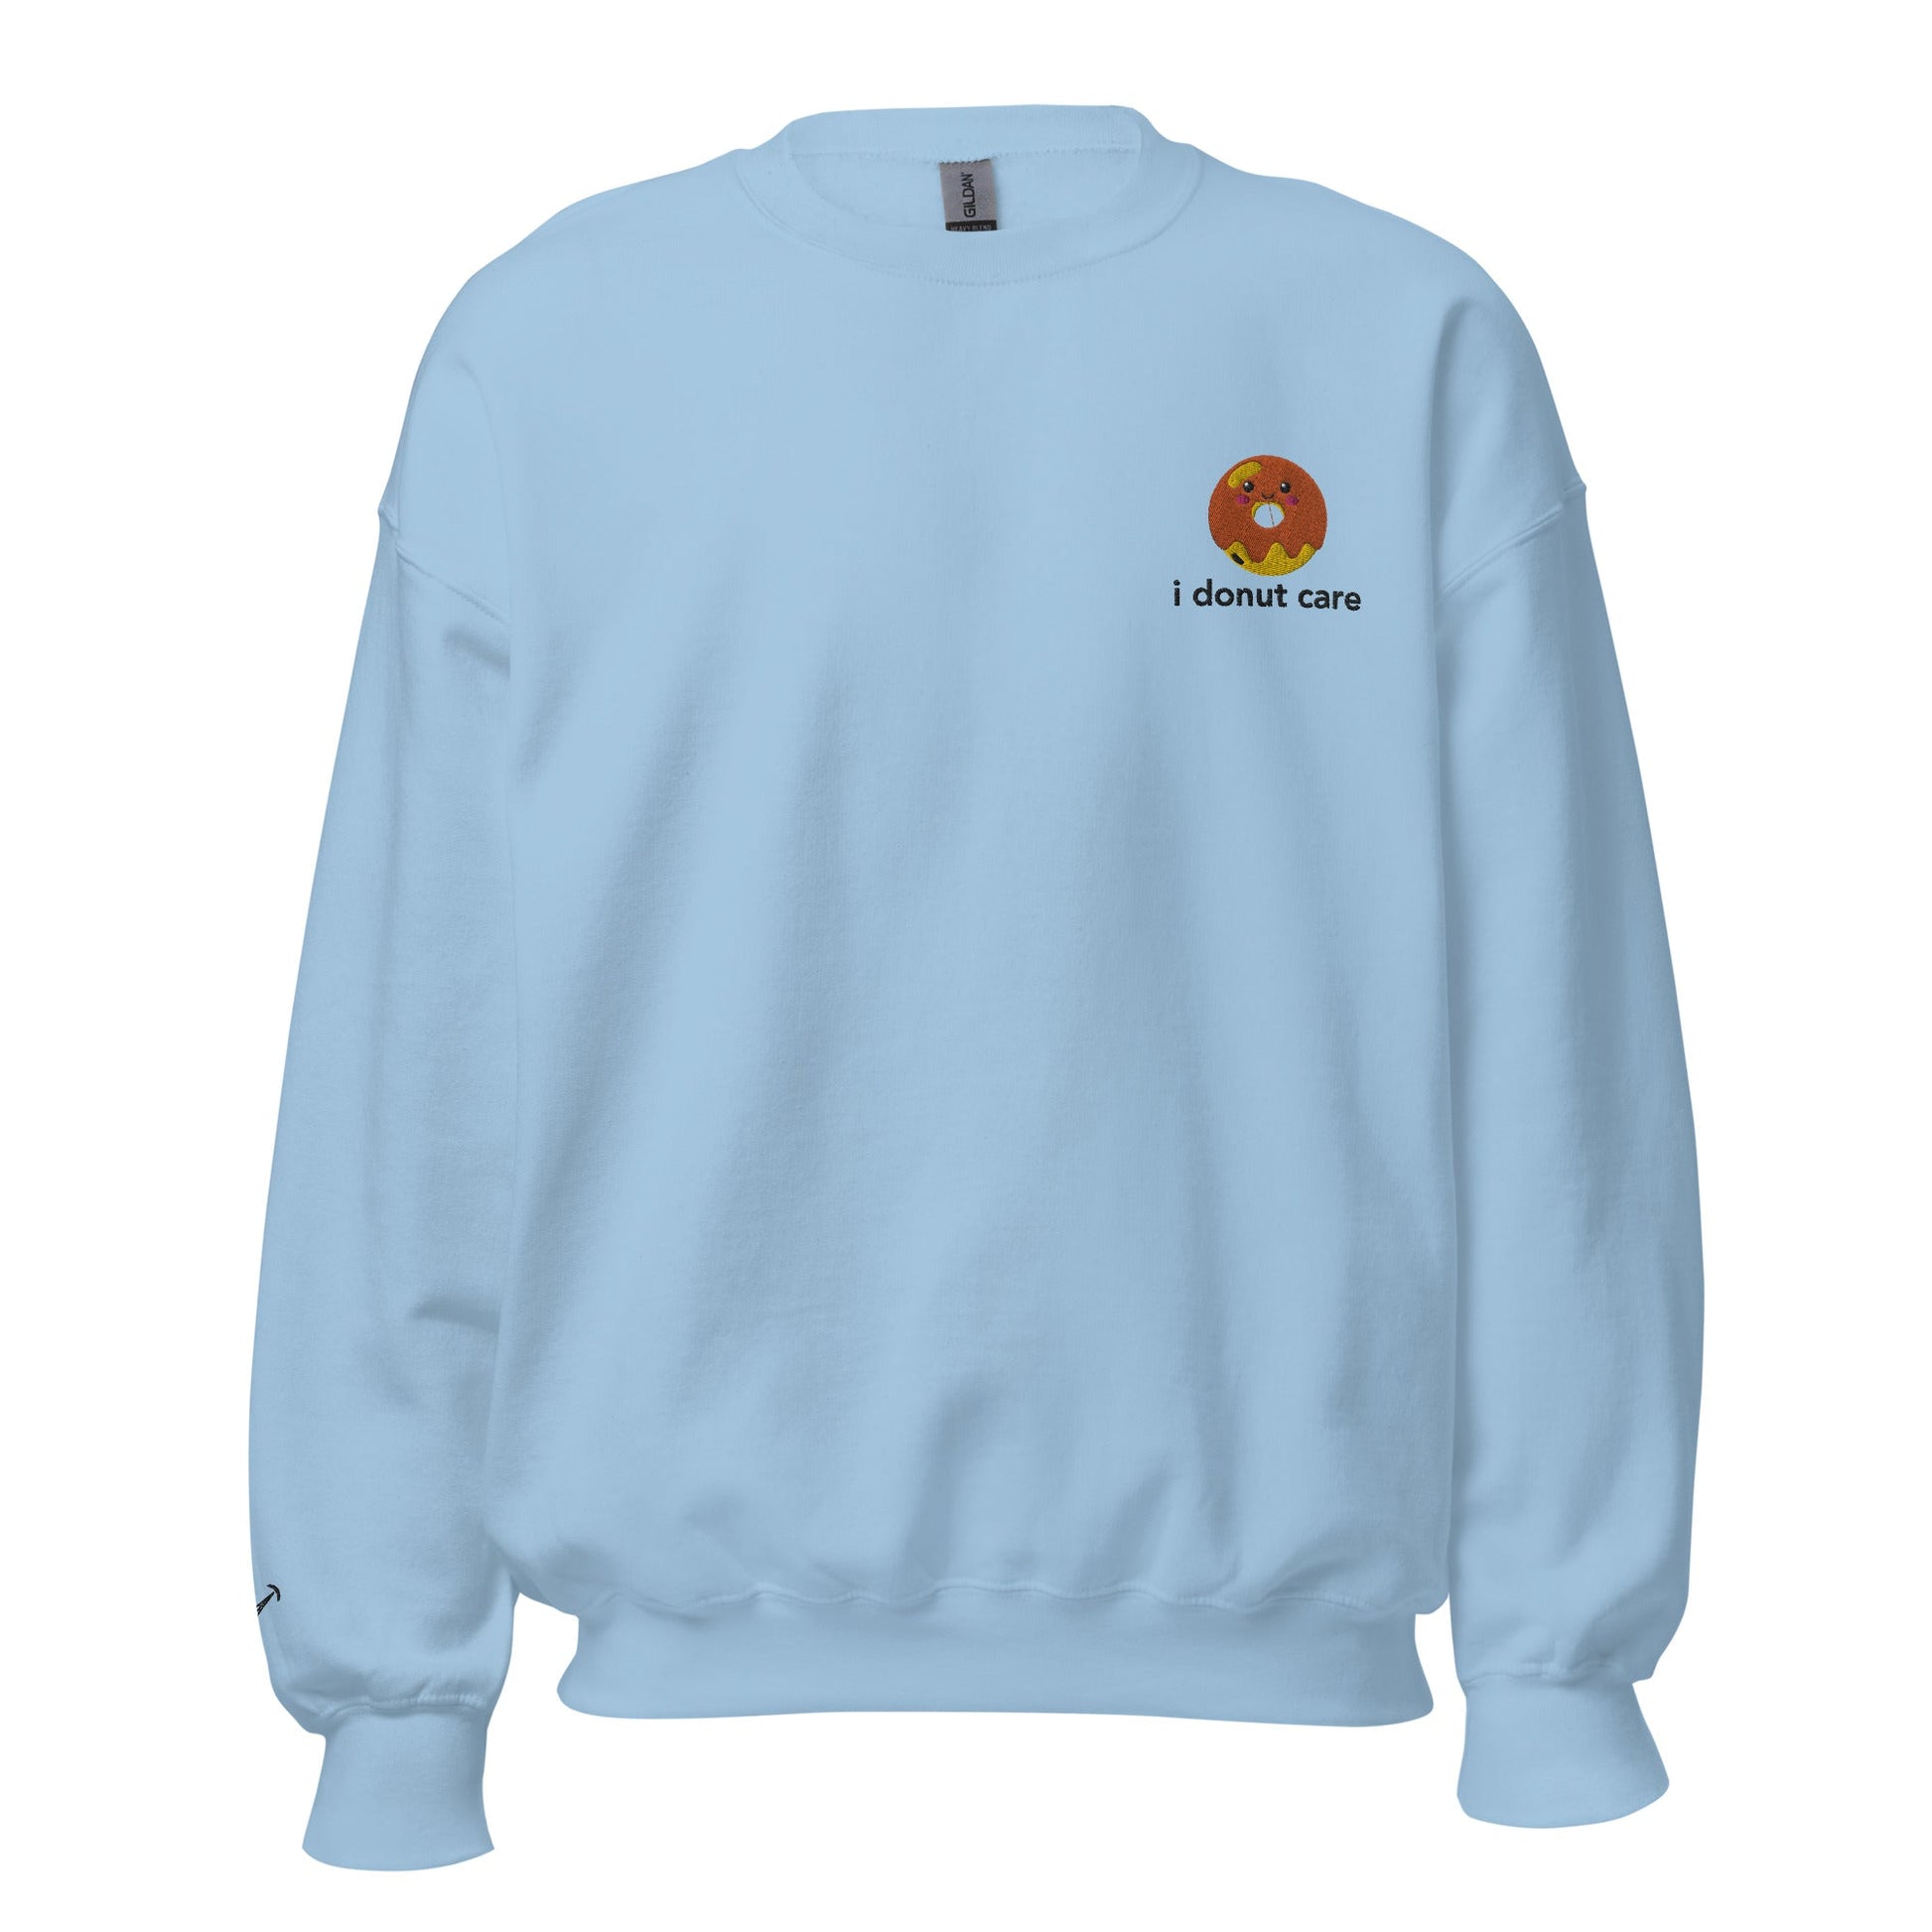 I Donut Care Embroidered Unisex Sweatshirt - chucklecouture co.